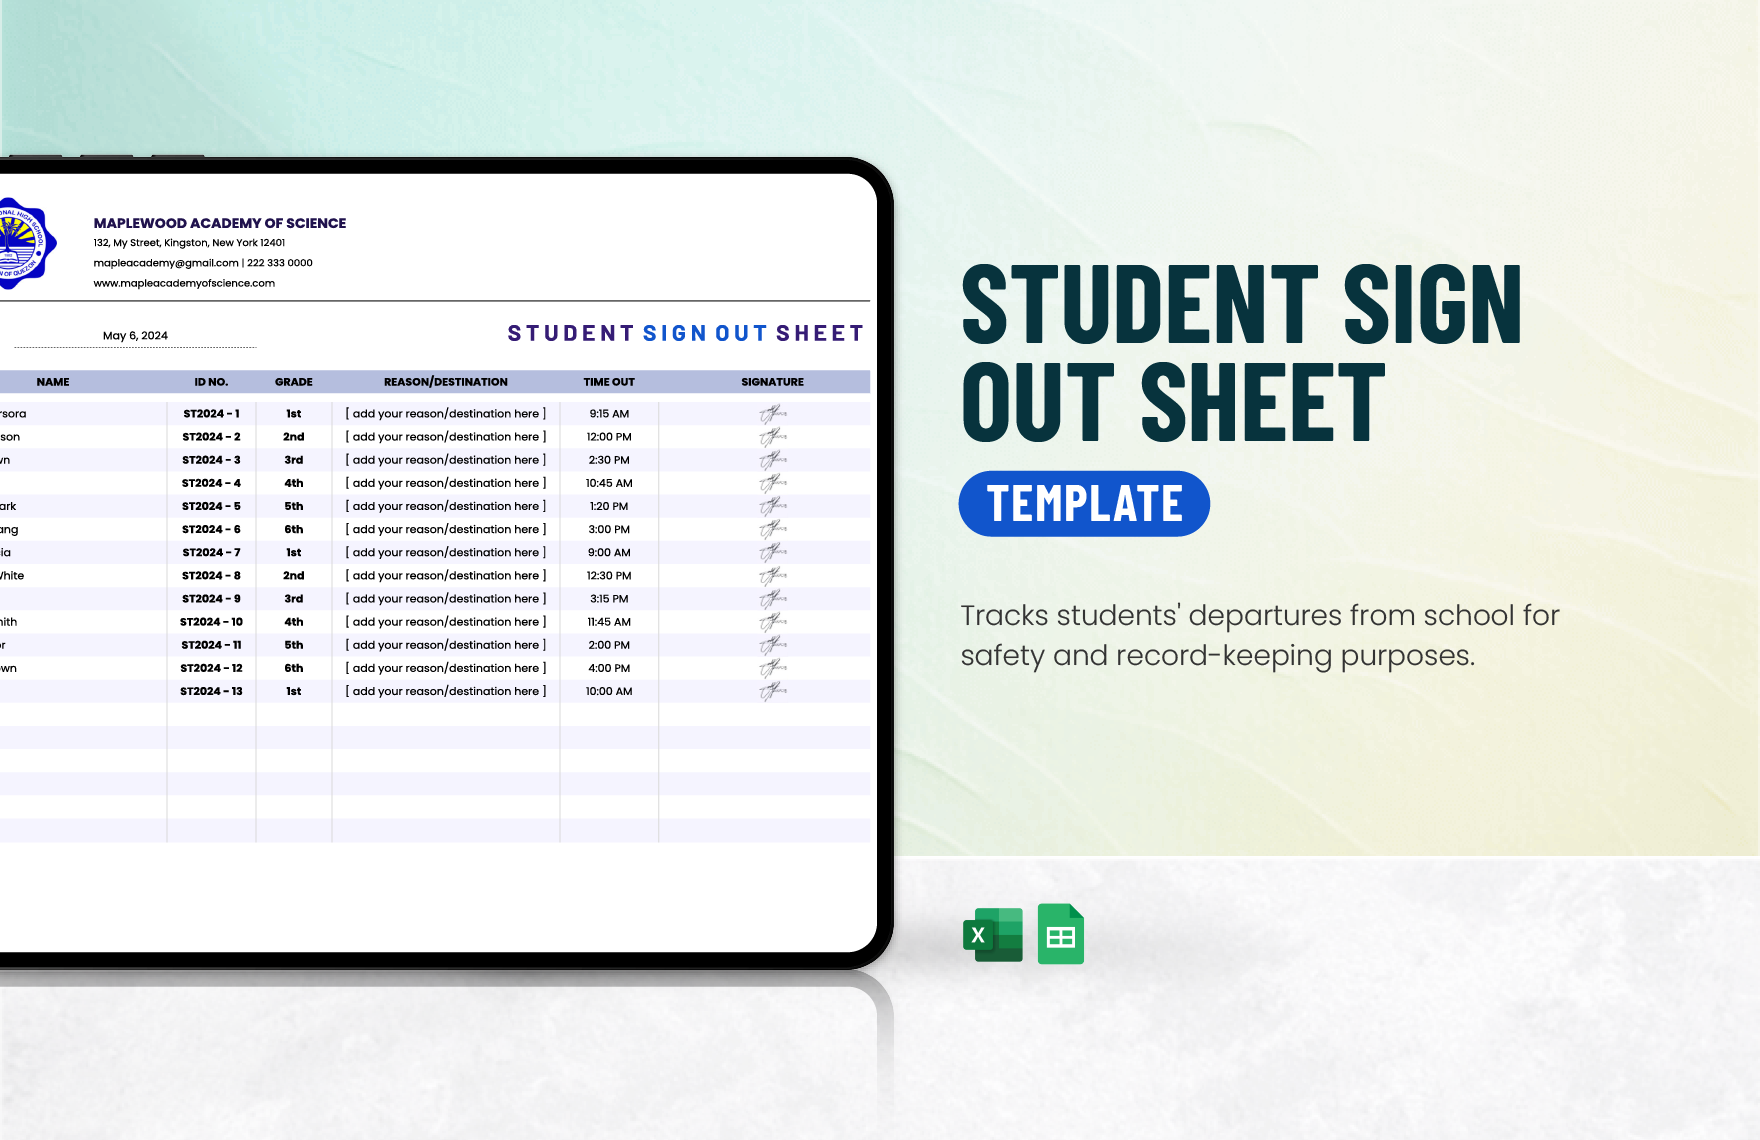 Student Sign Out Sheet Template in Excel, Google Sheets